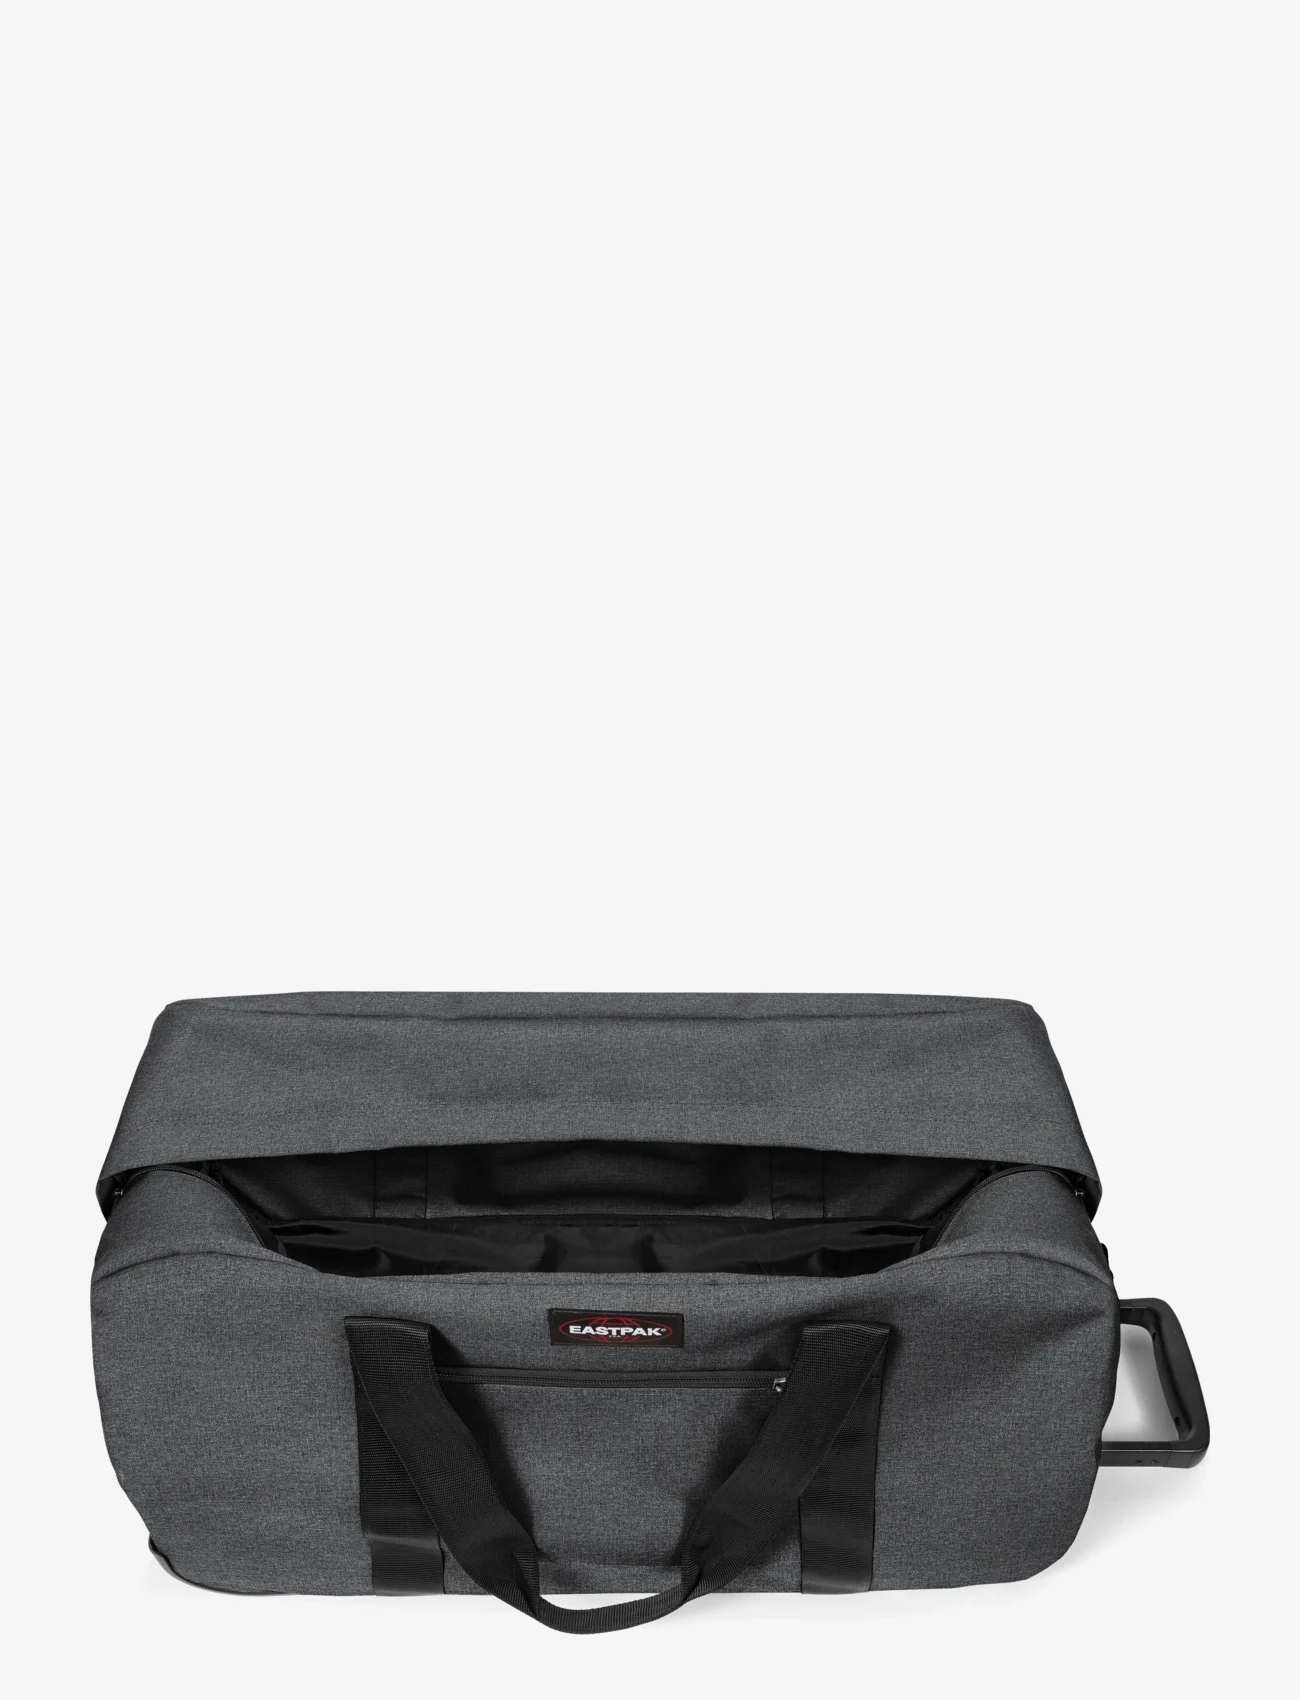 Eastpak - Container 65 + - koffers - black - 1